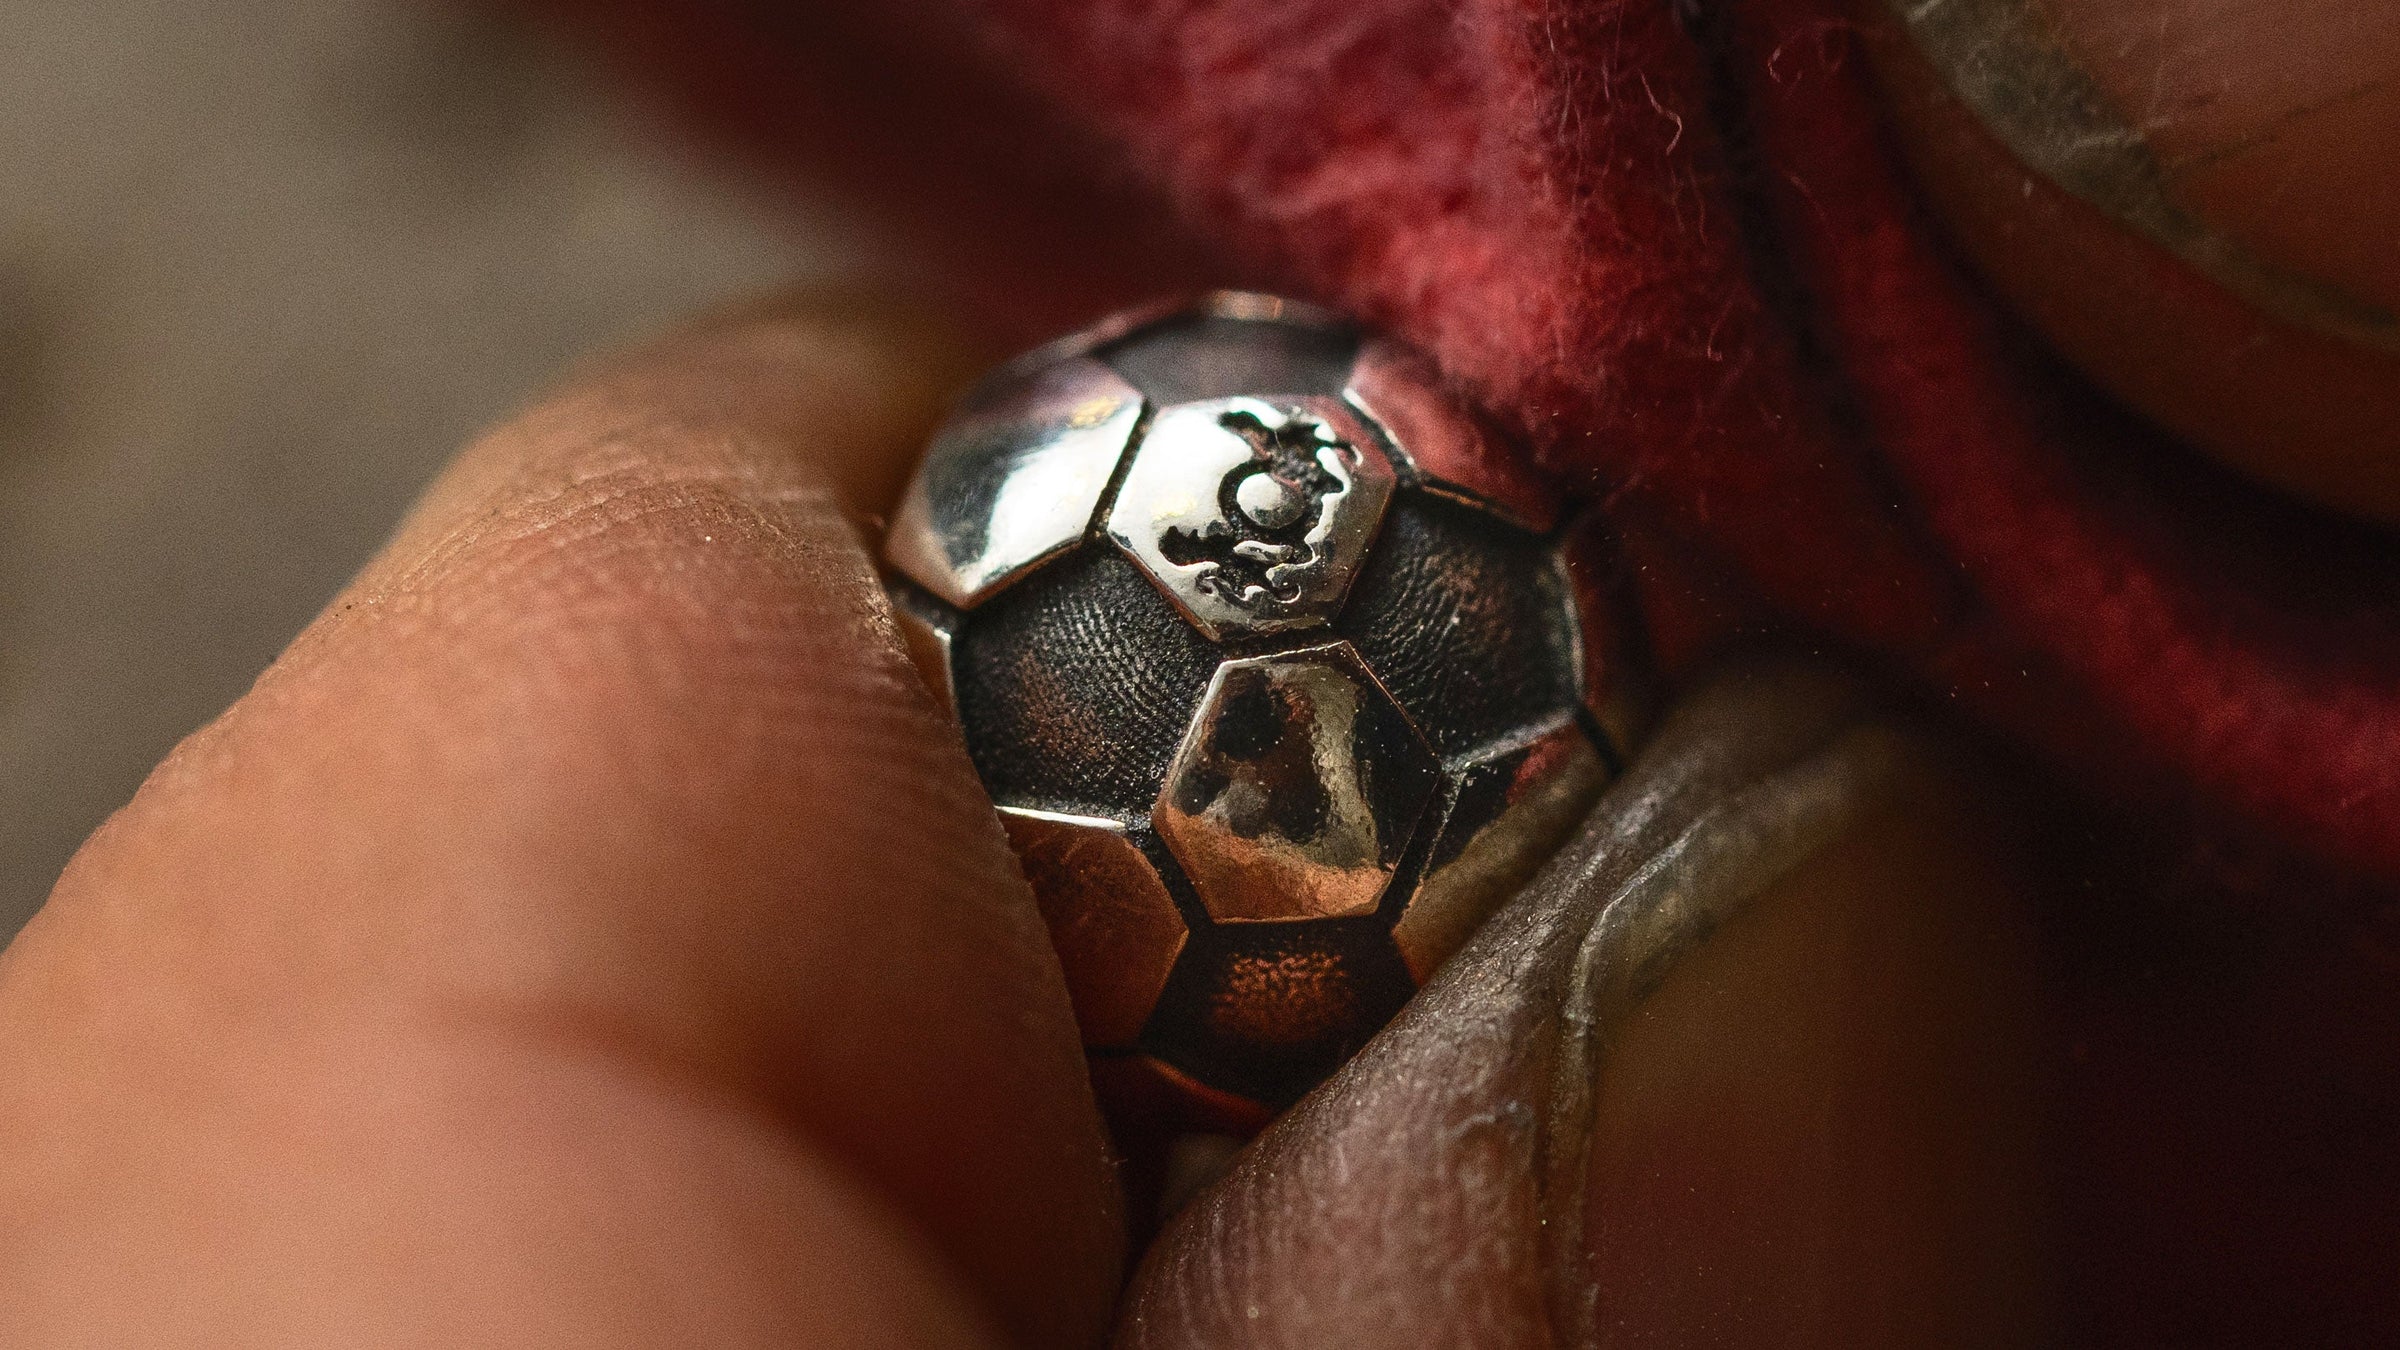 Trollbeads silver Football Passion bead being polished